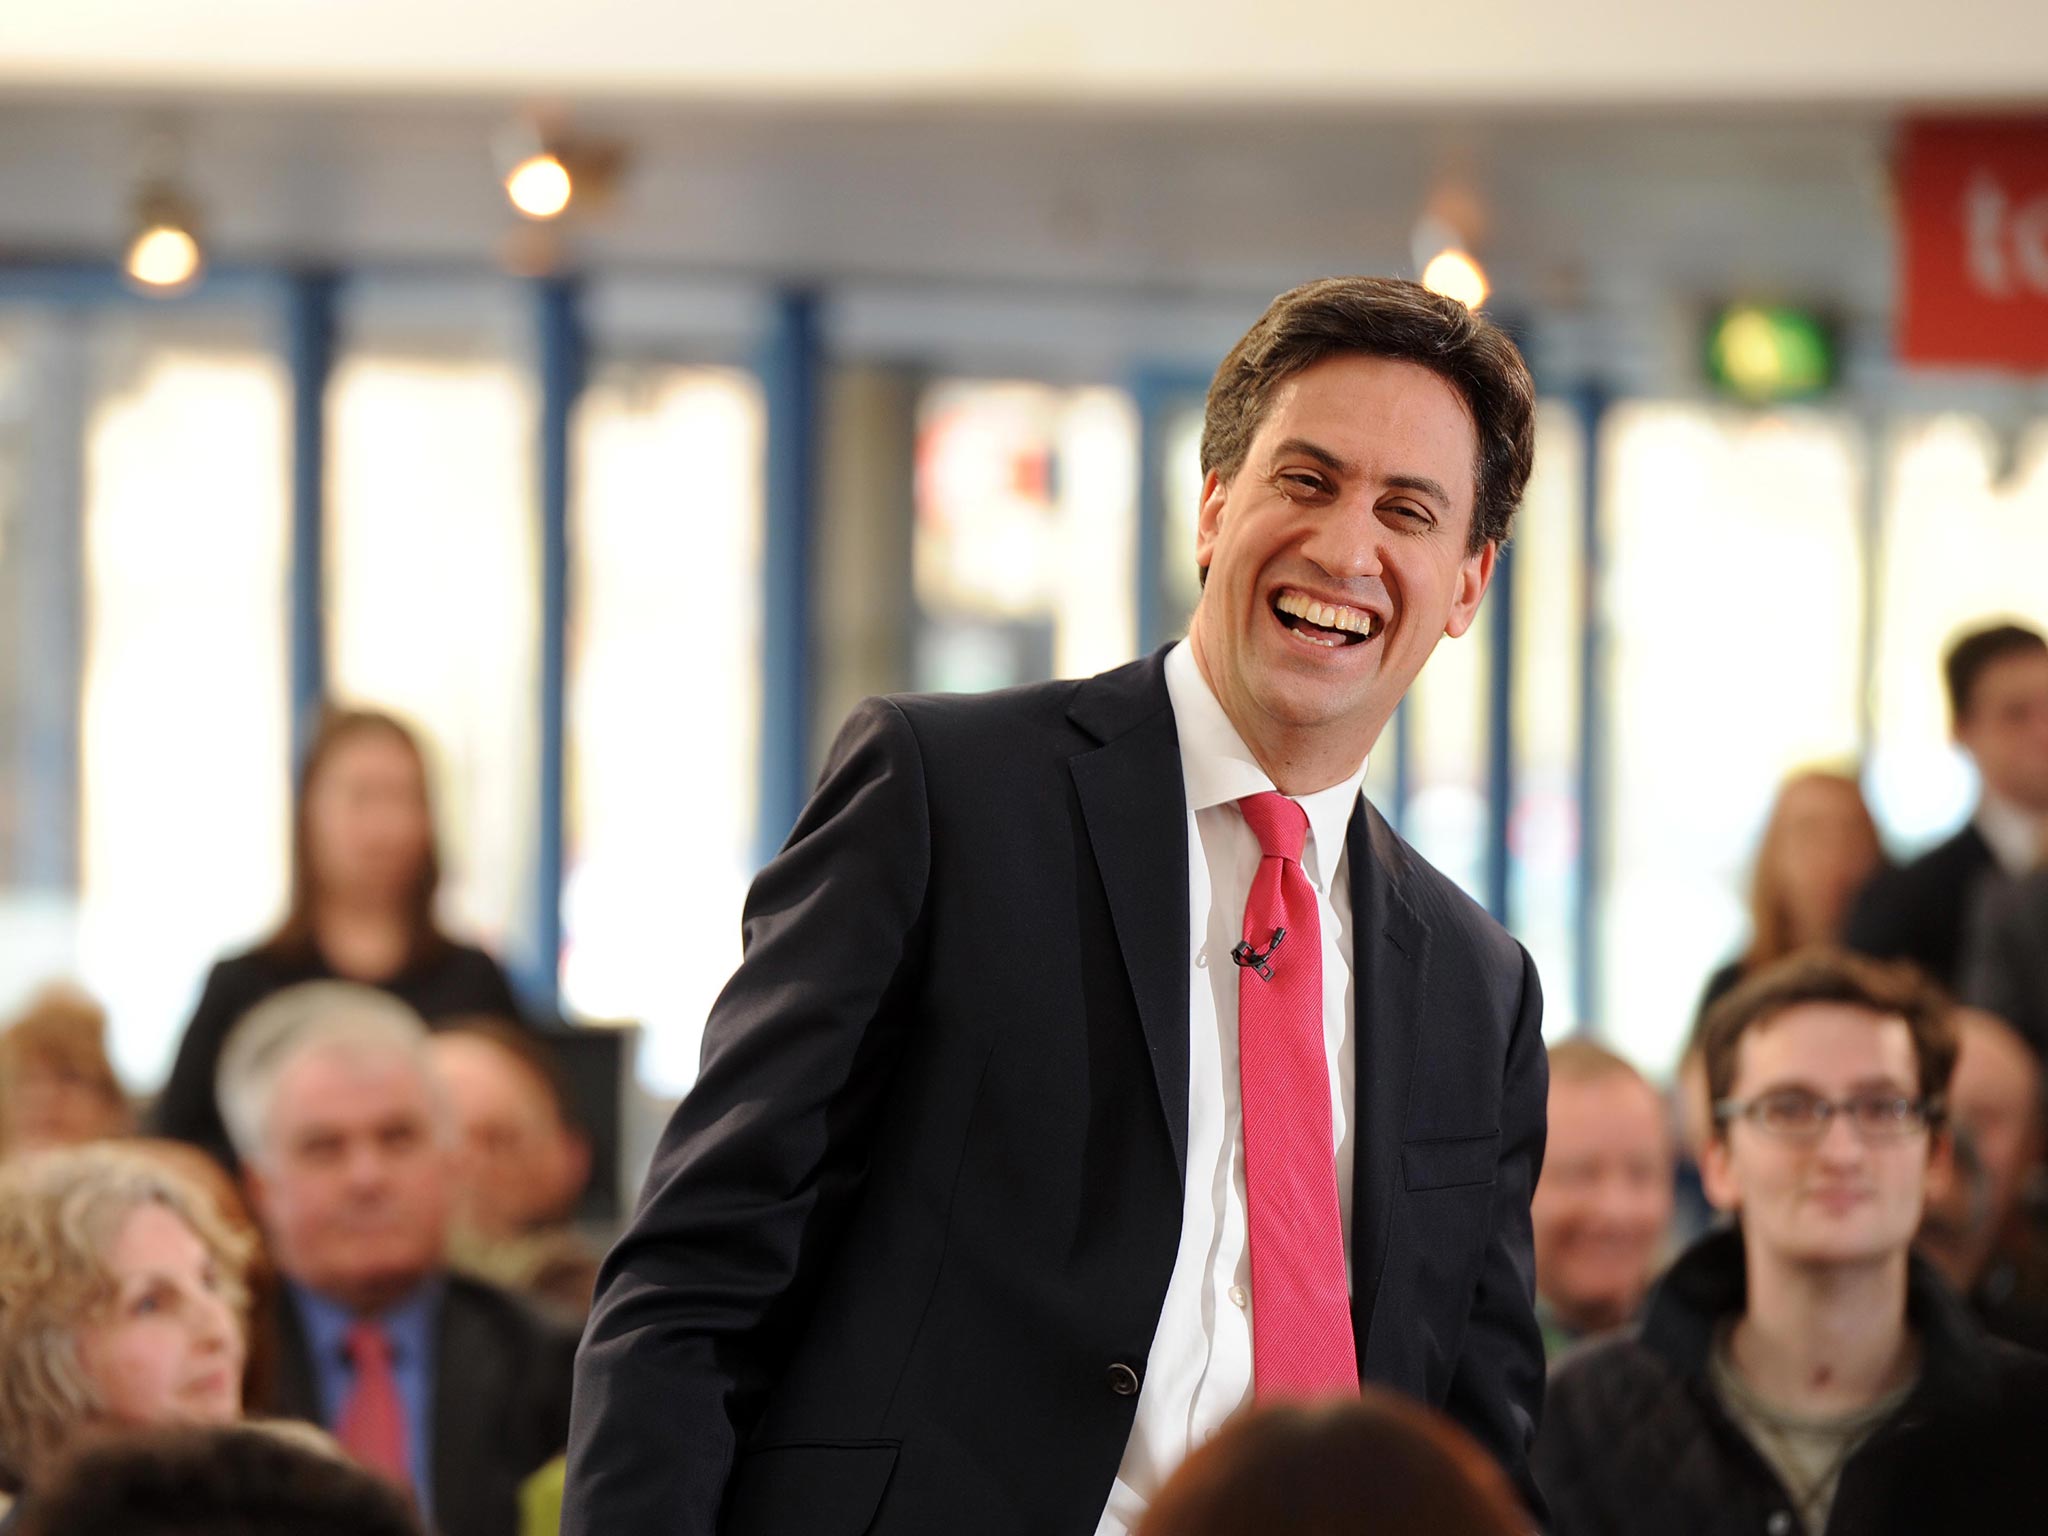 Ed Miliband at a party reform Q&A session in Leeds yesterday